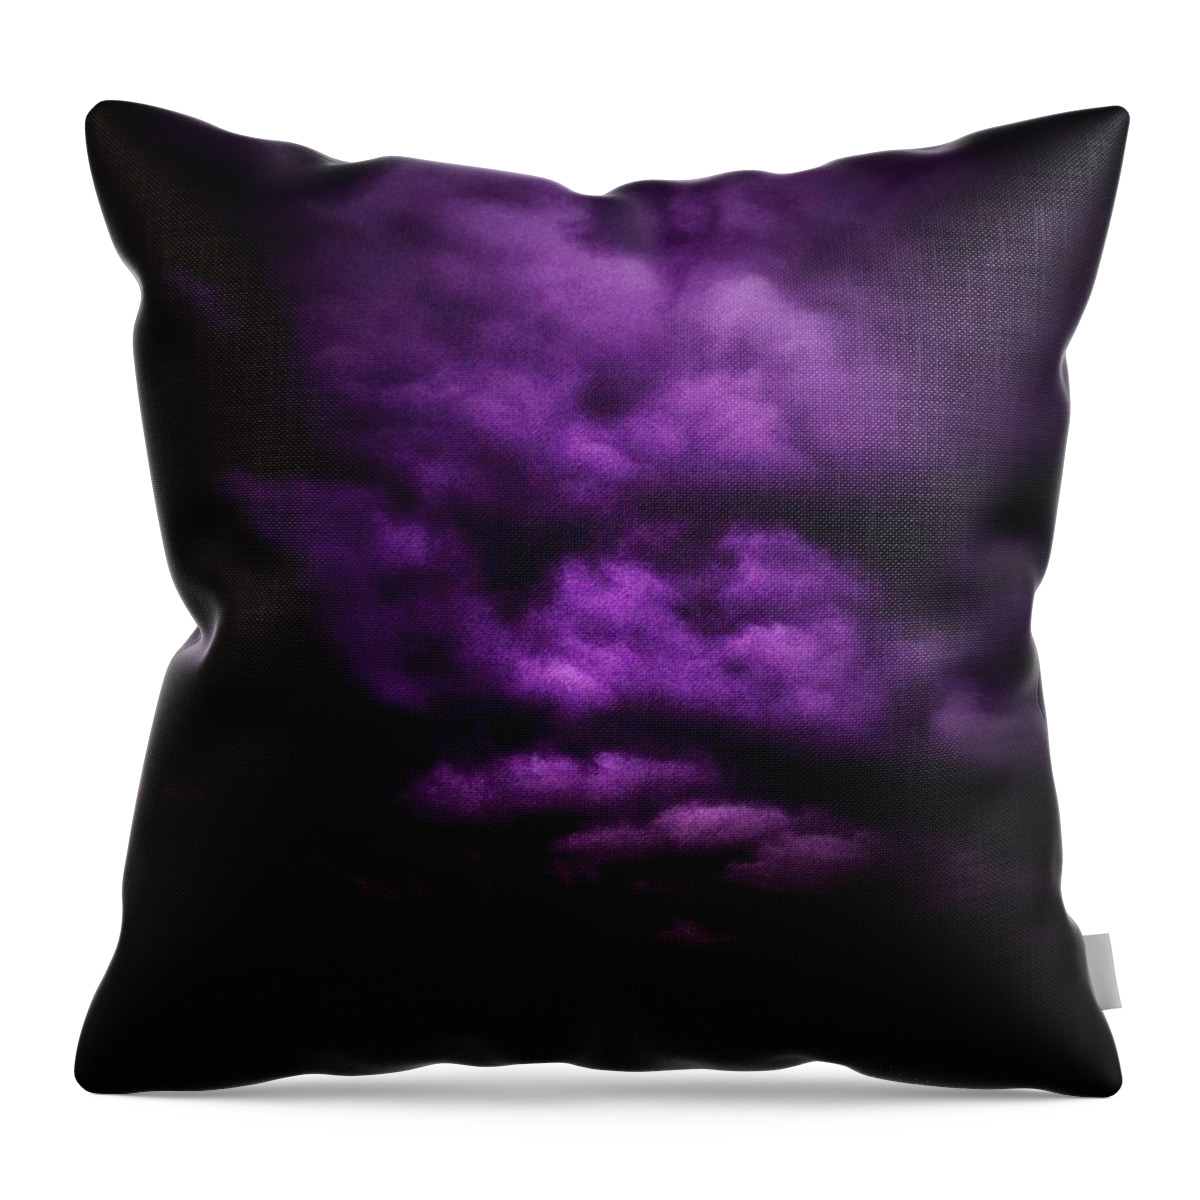 Gloom Throw Pillow featuring the photograph Gloom IIi by Mimulux Patricia No